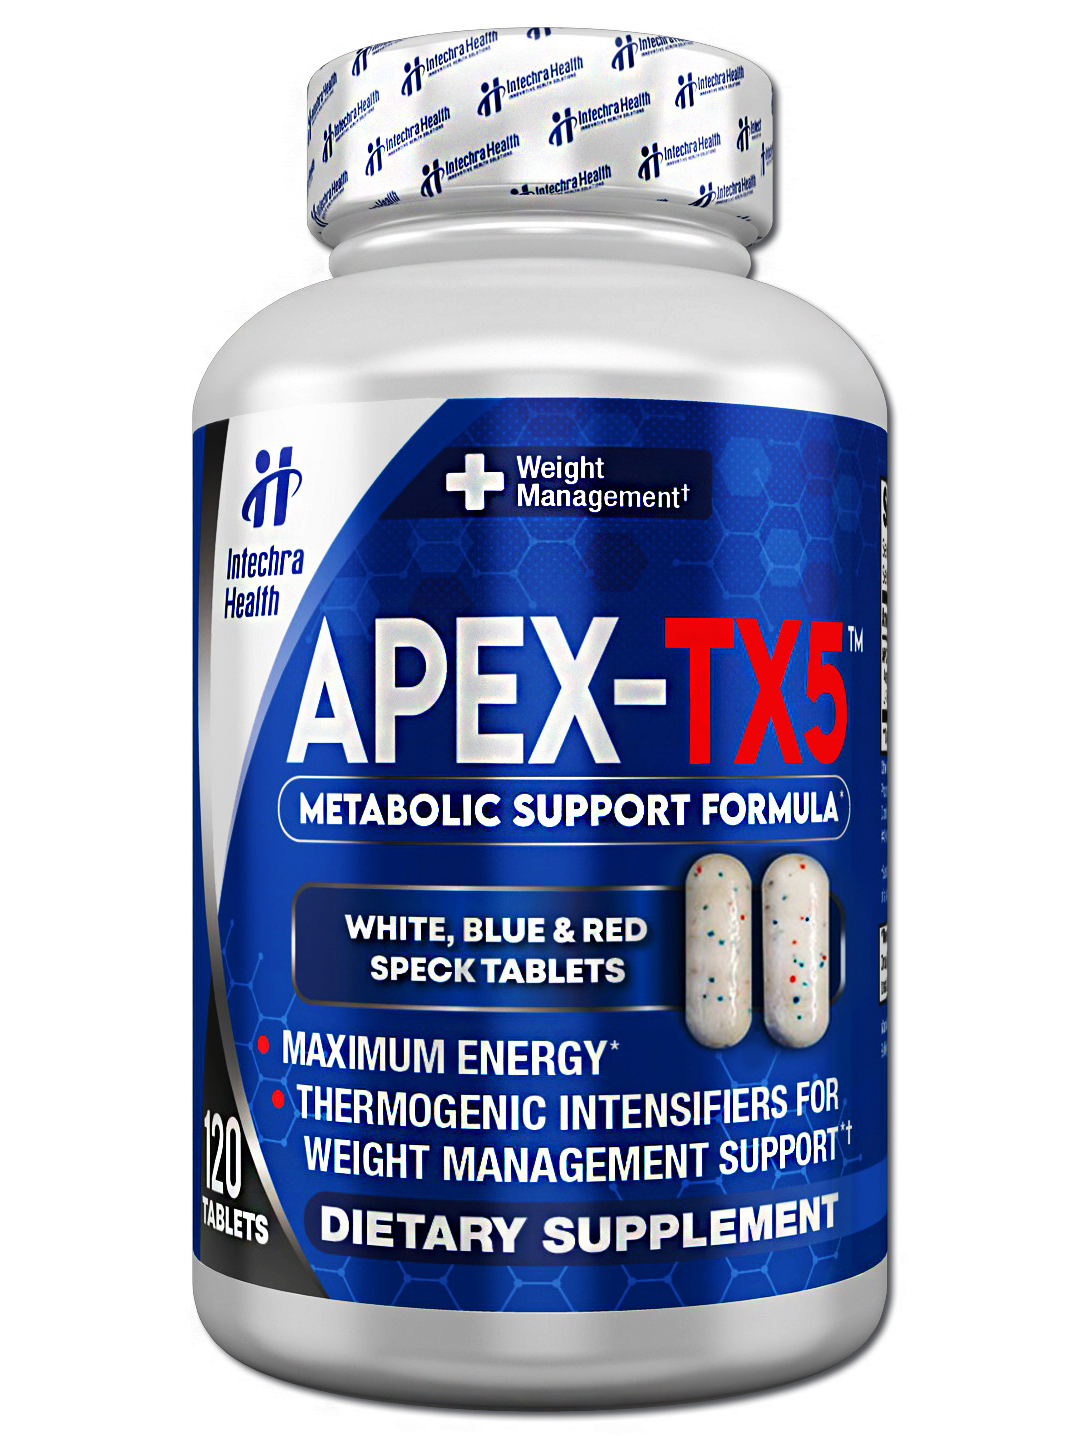 APEX-TX5 Diet Pills - Weight Management & Energy Support, 120 Tablets Per Bottle - image 1 of 7